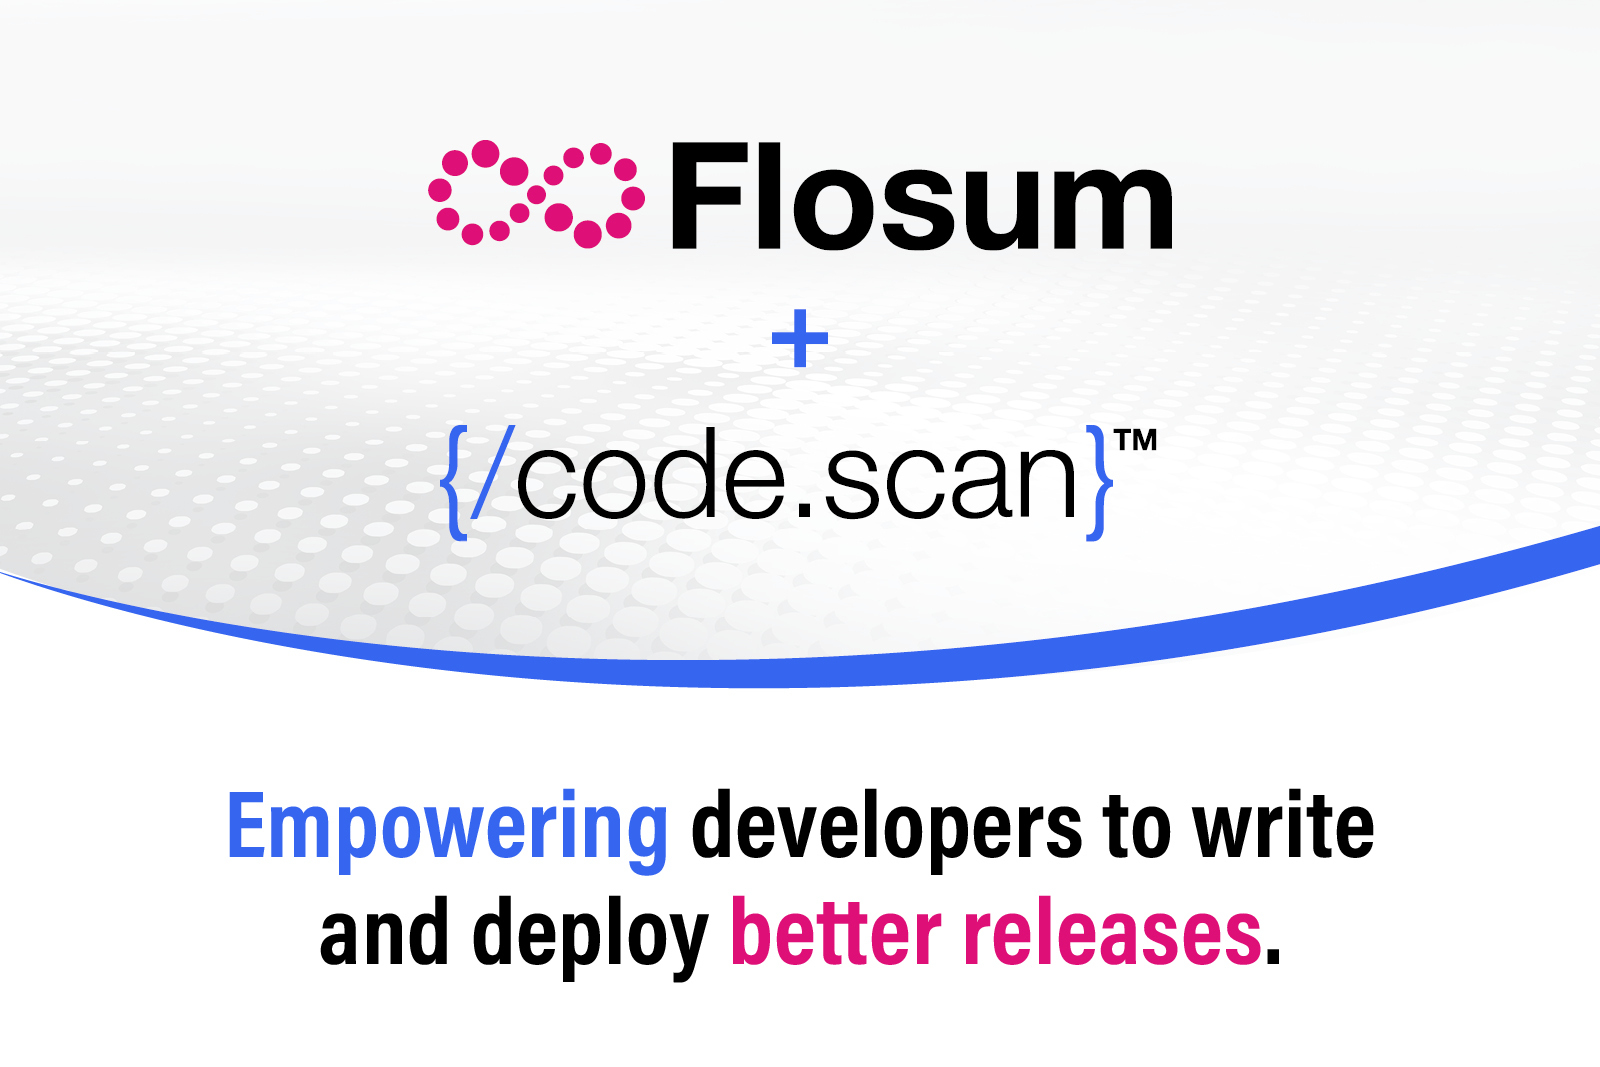 Flosum and CodeScan Empowering Developers Together